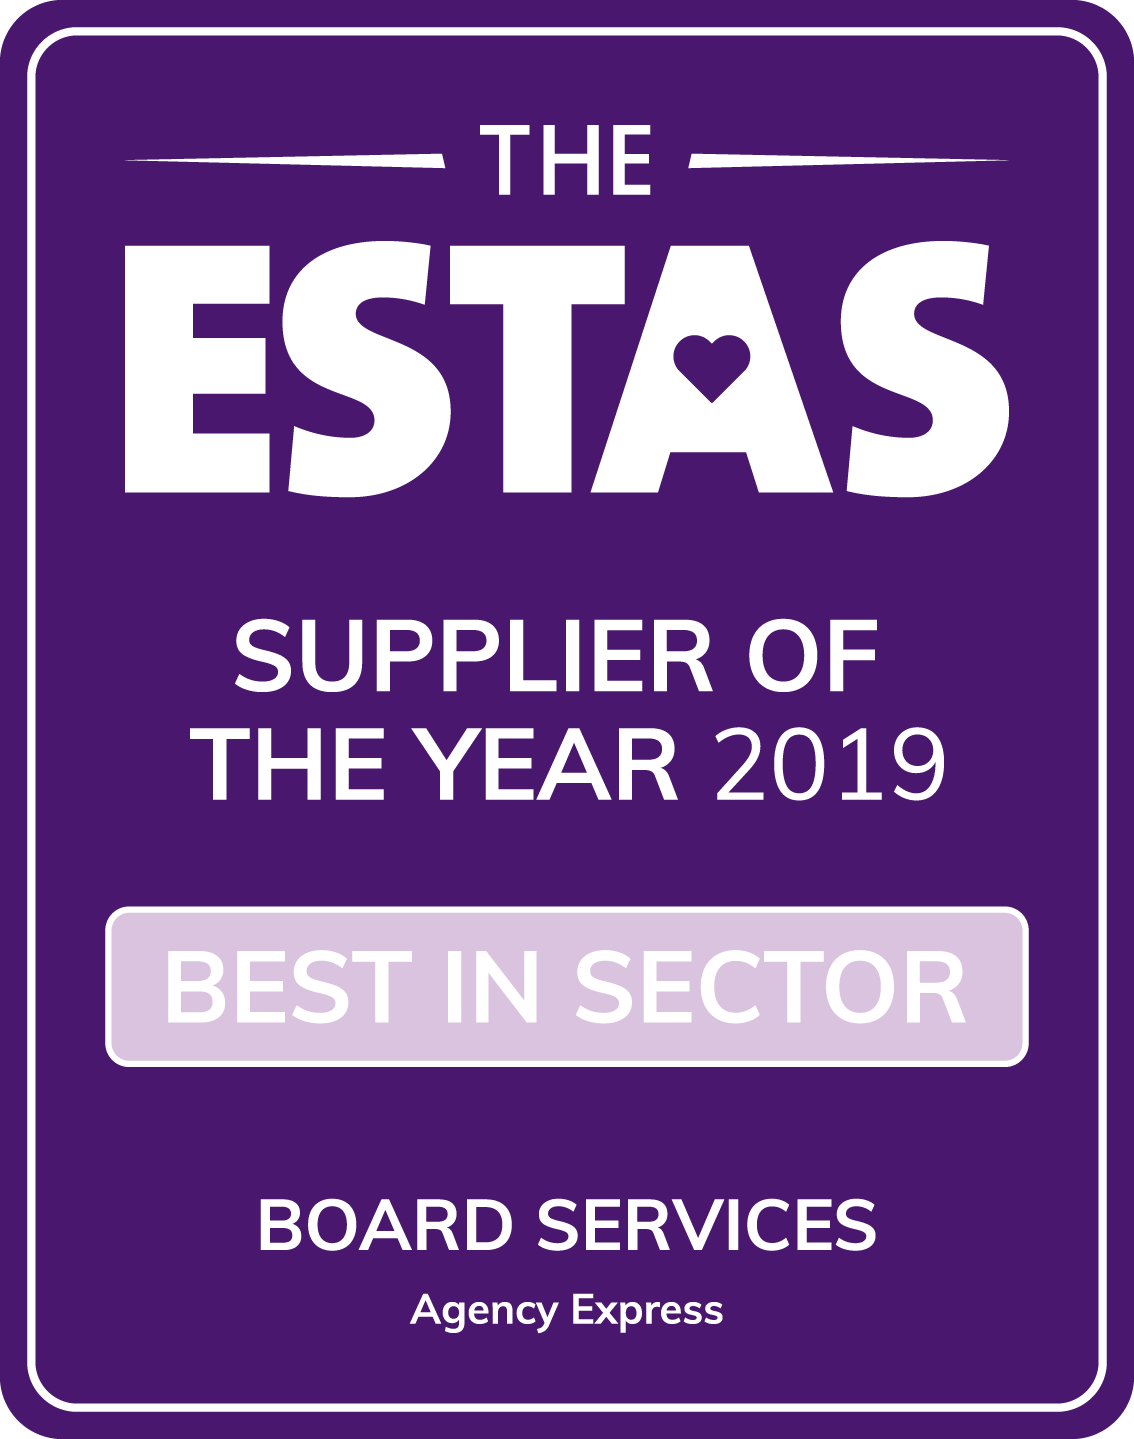 2019 ESTAS Awards - Supplier of the Year - Best in sector logo